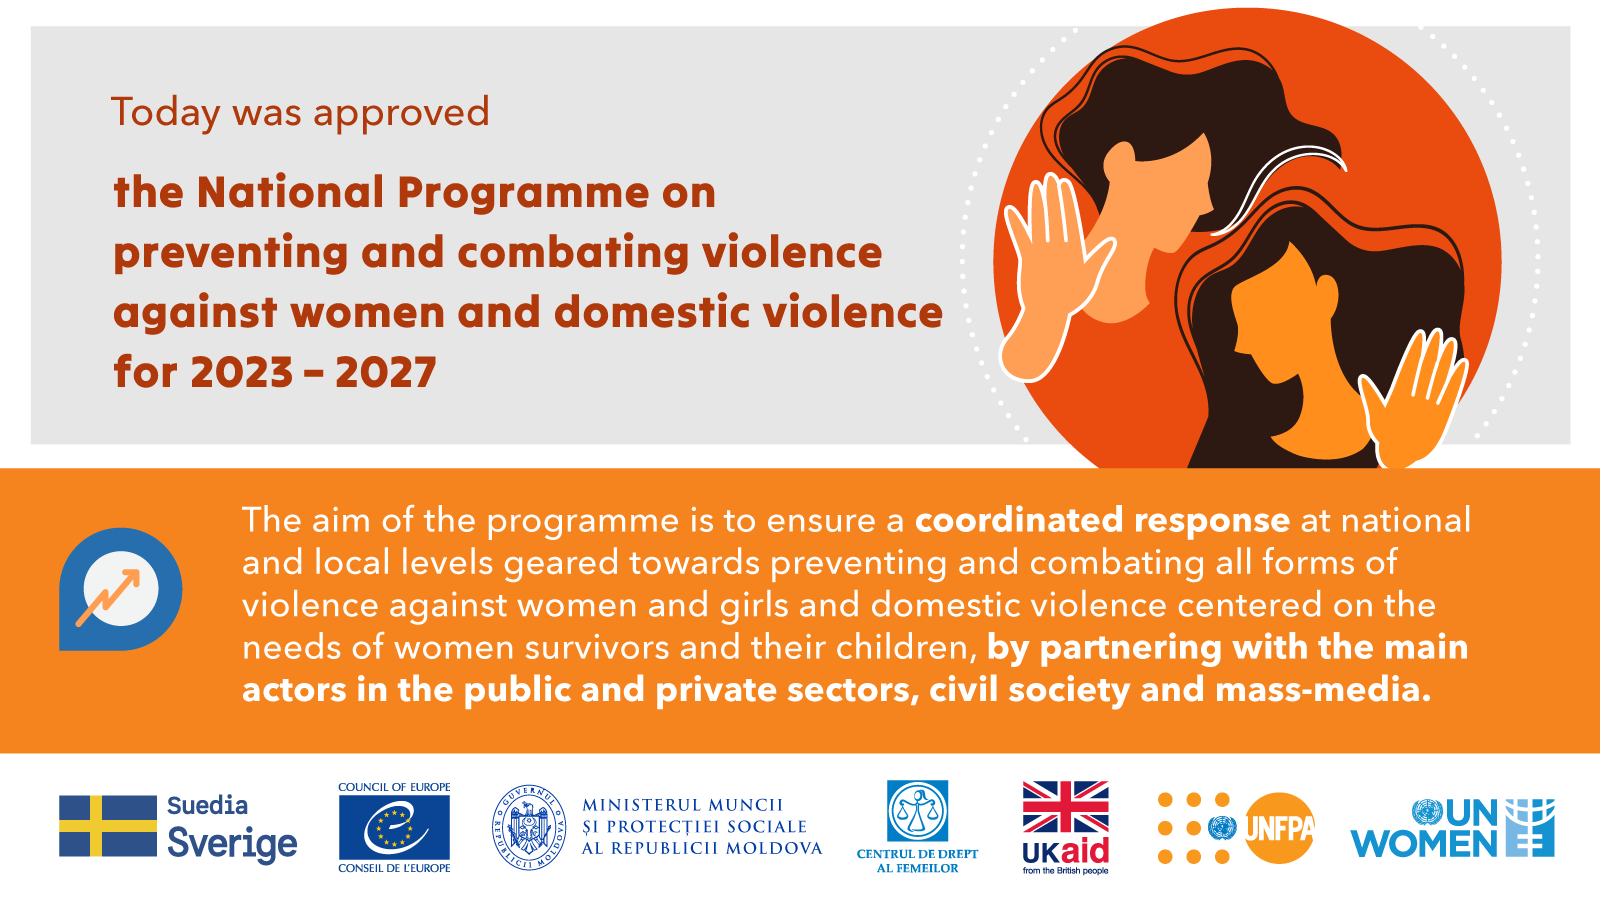 <strong>The Government of the Republic of Moldova has approved the National Programme on Preventing and Combating Violence against Women and Domestic Violence for 2023-2027</strong>